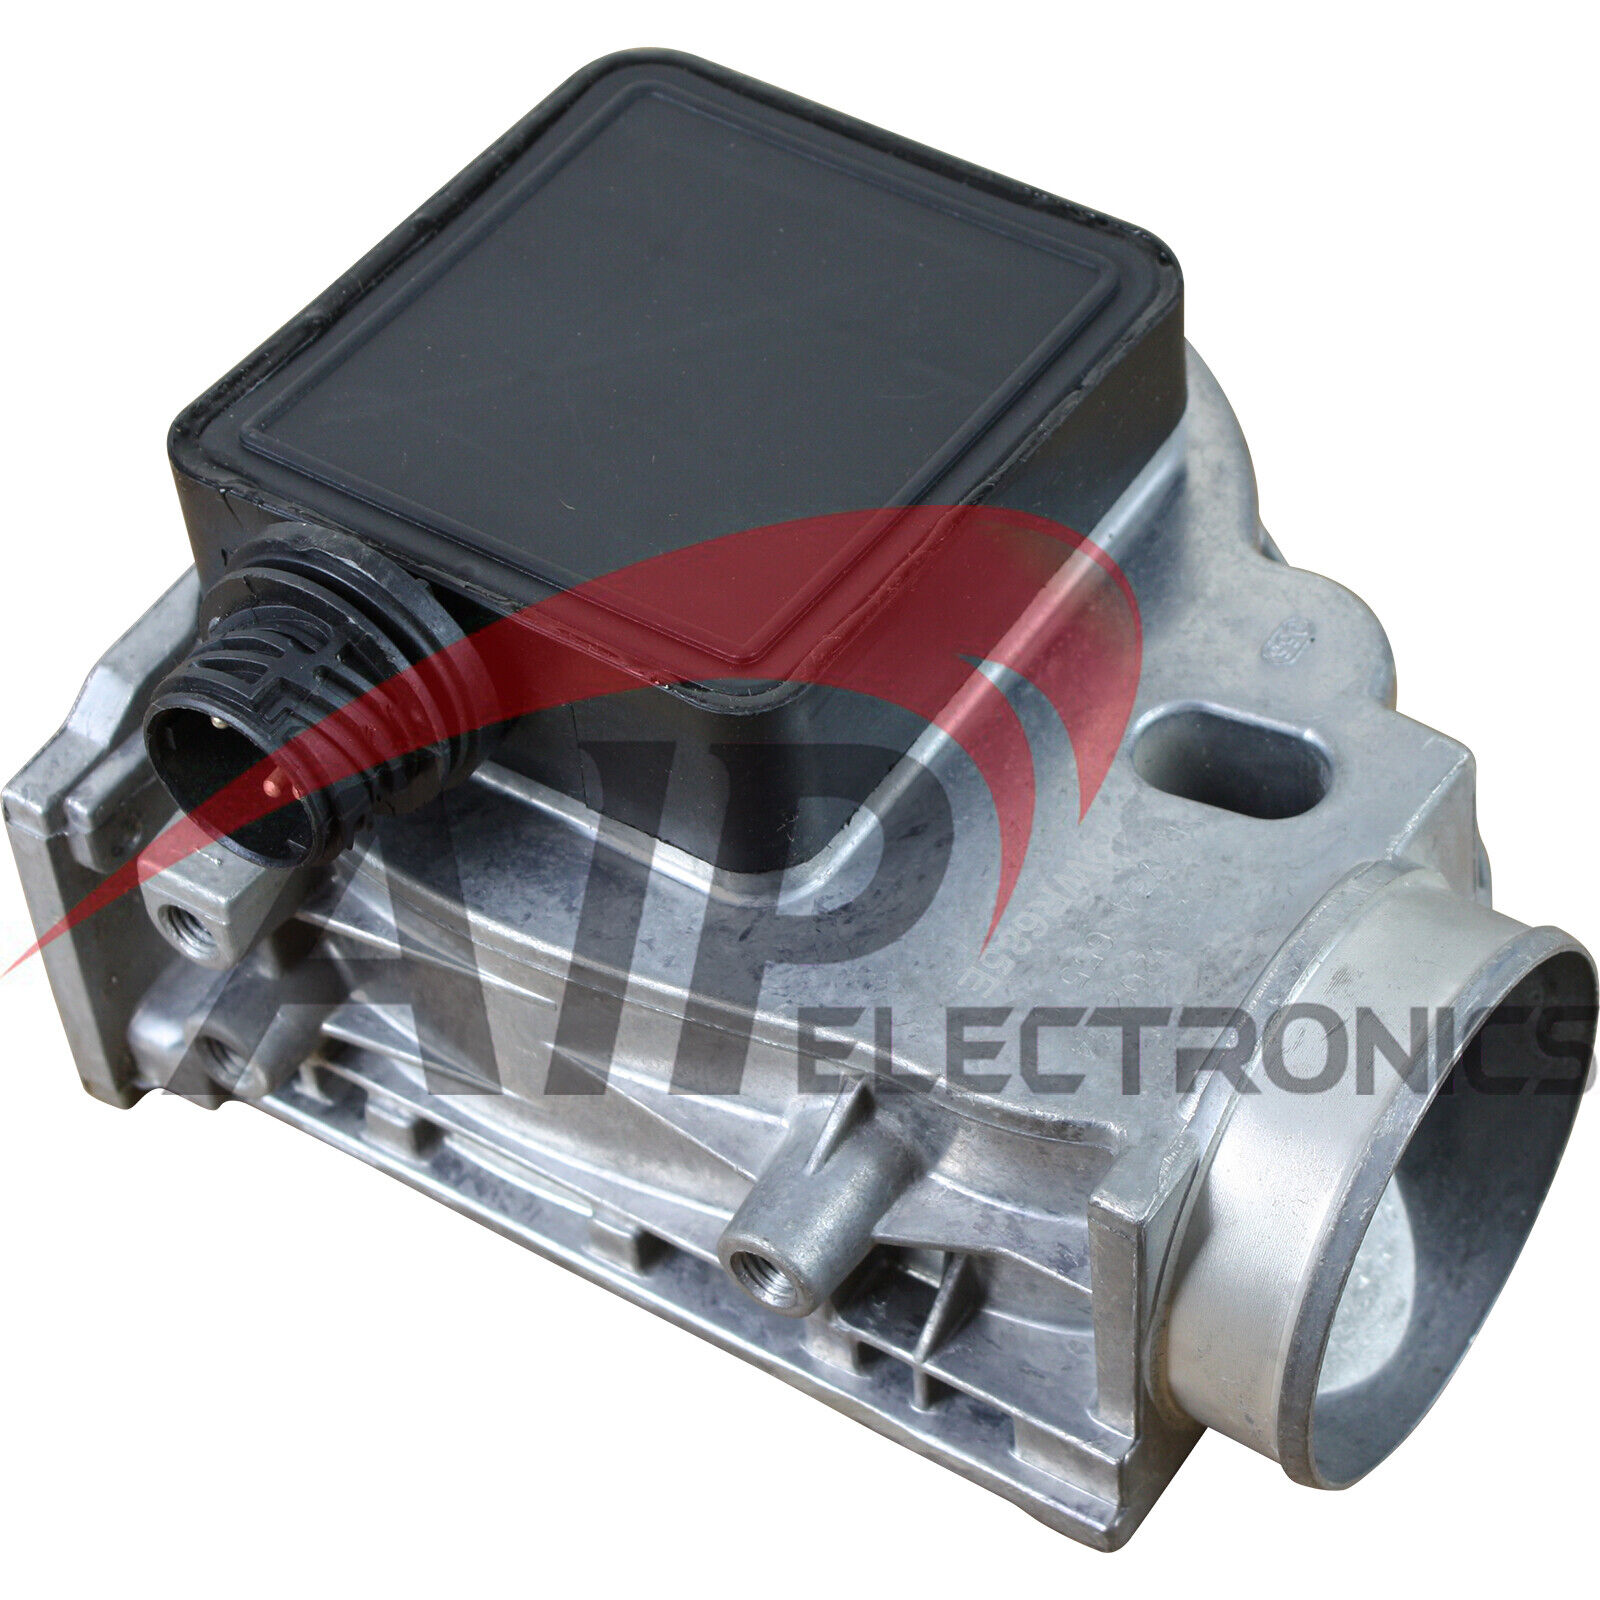 NEW MASS AIR FLOW SENSOR METER **FOR BMW 318 I iC iS Ti